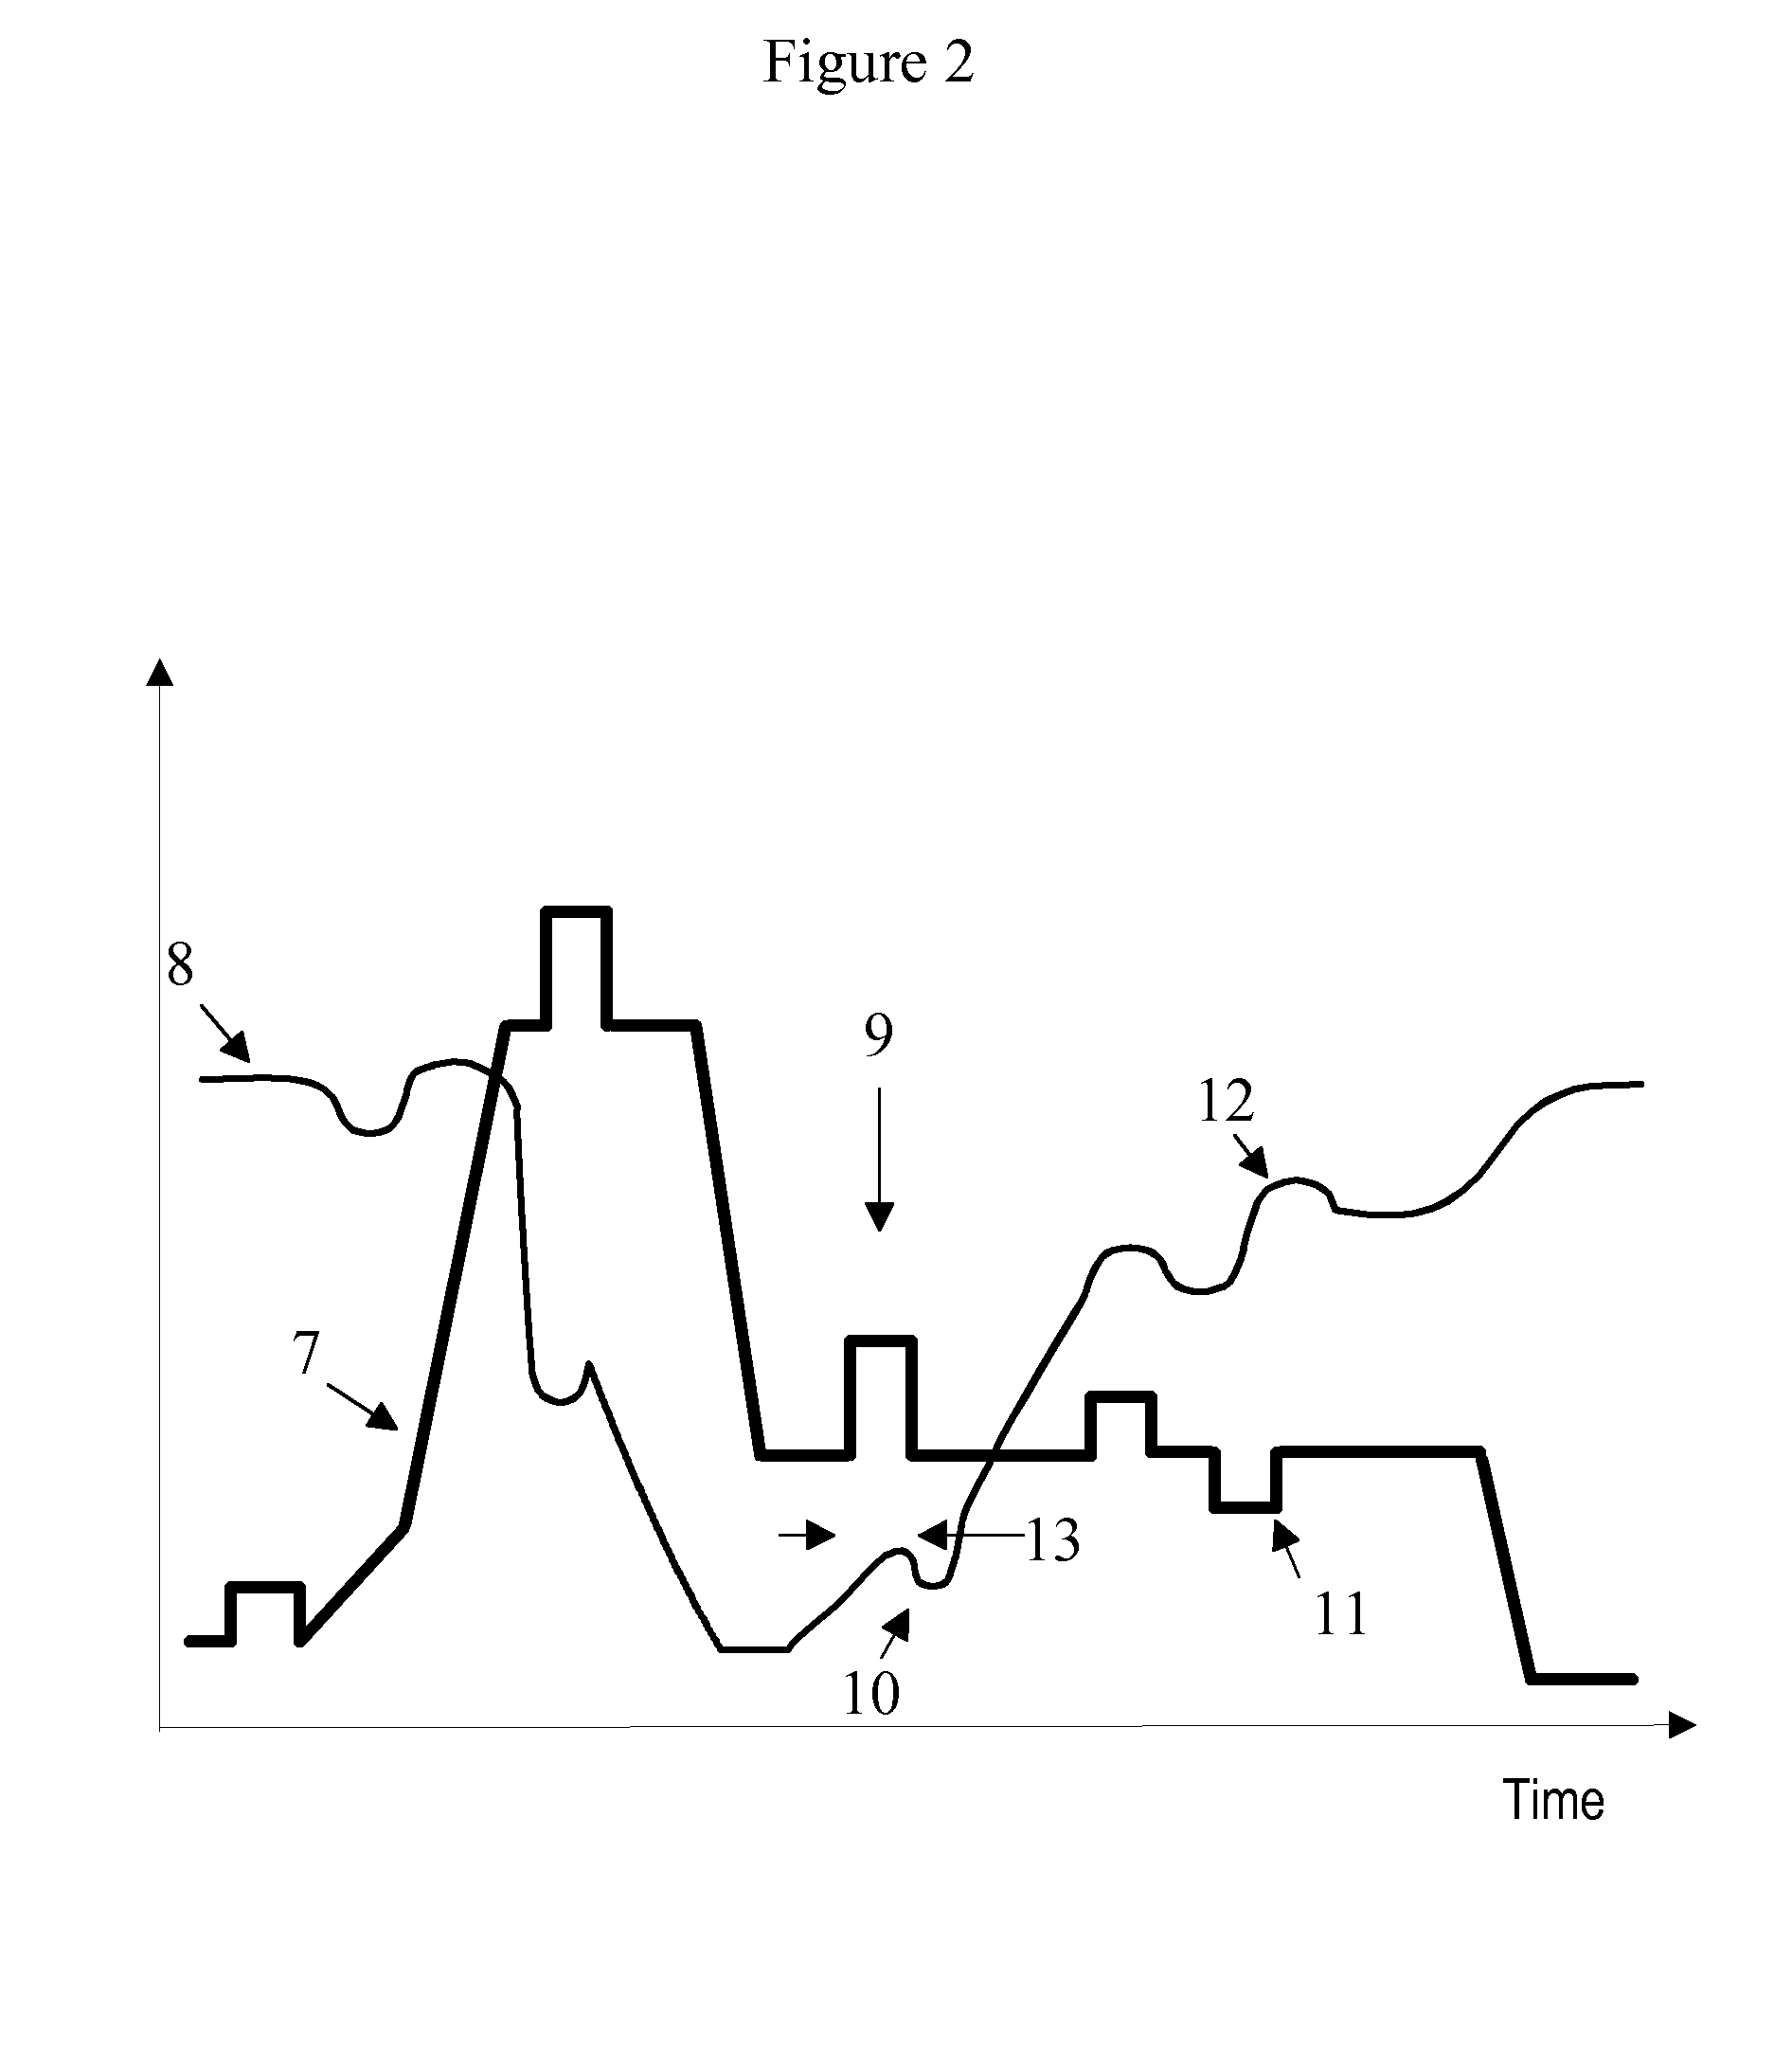 Automatic calibration of the sensitivity of a subject to a drug